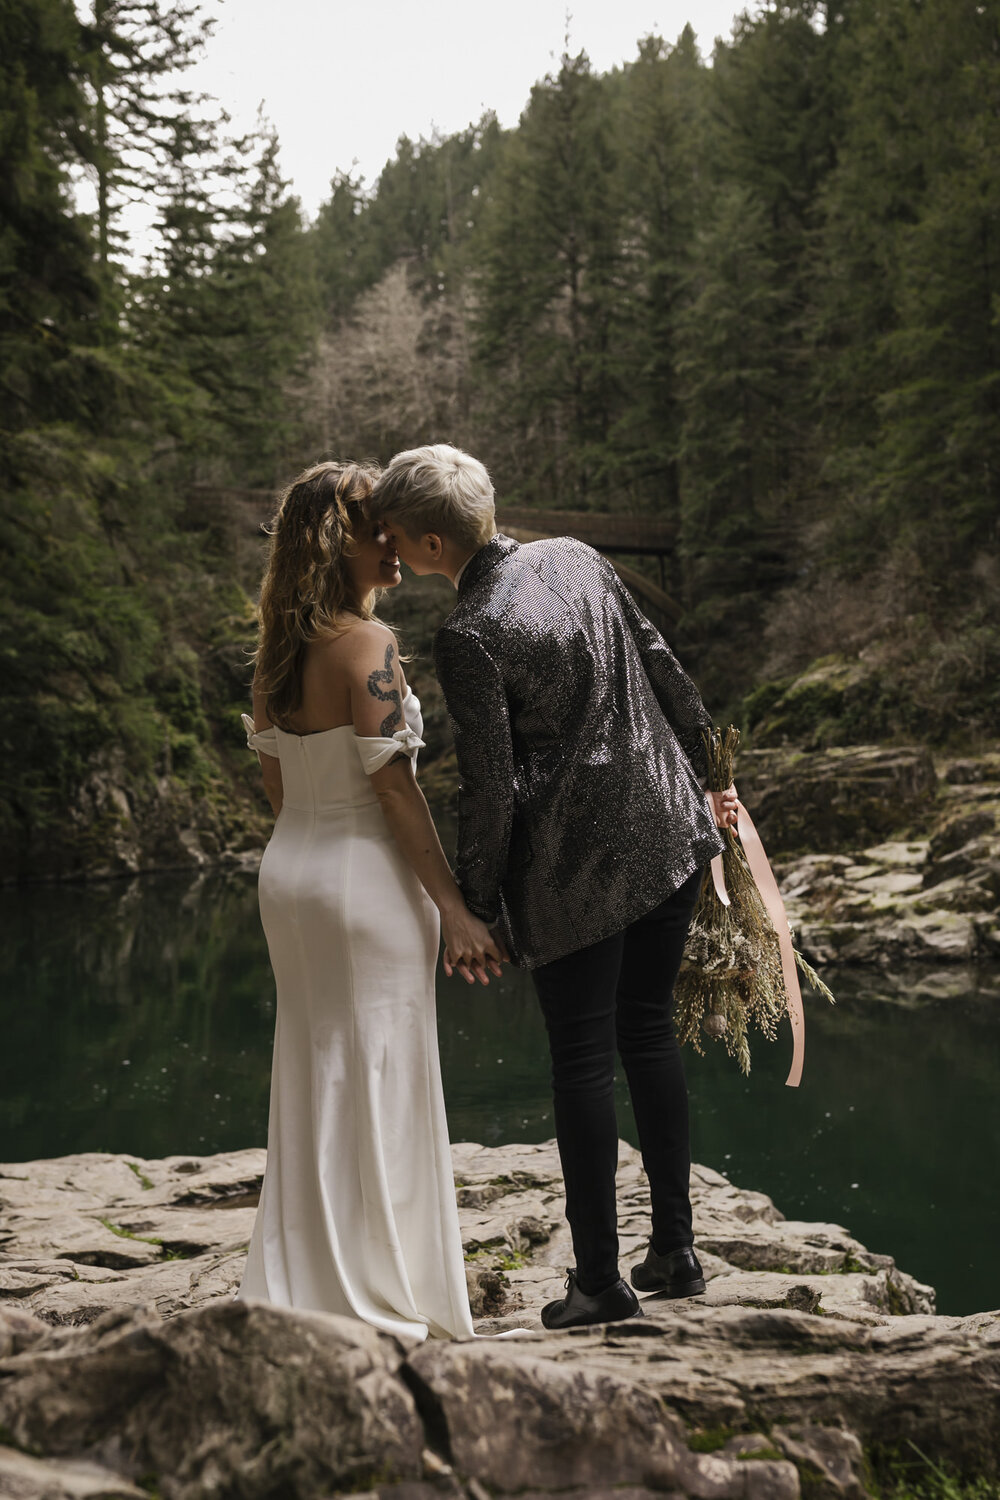 Wedding couple kiss on their elopement day in a forest in Washington